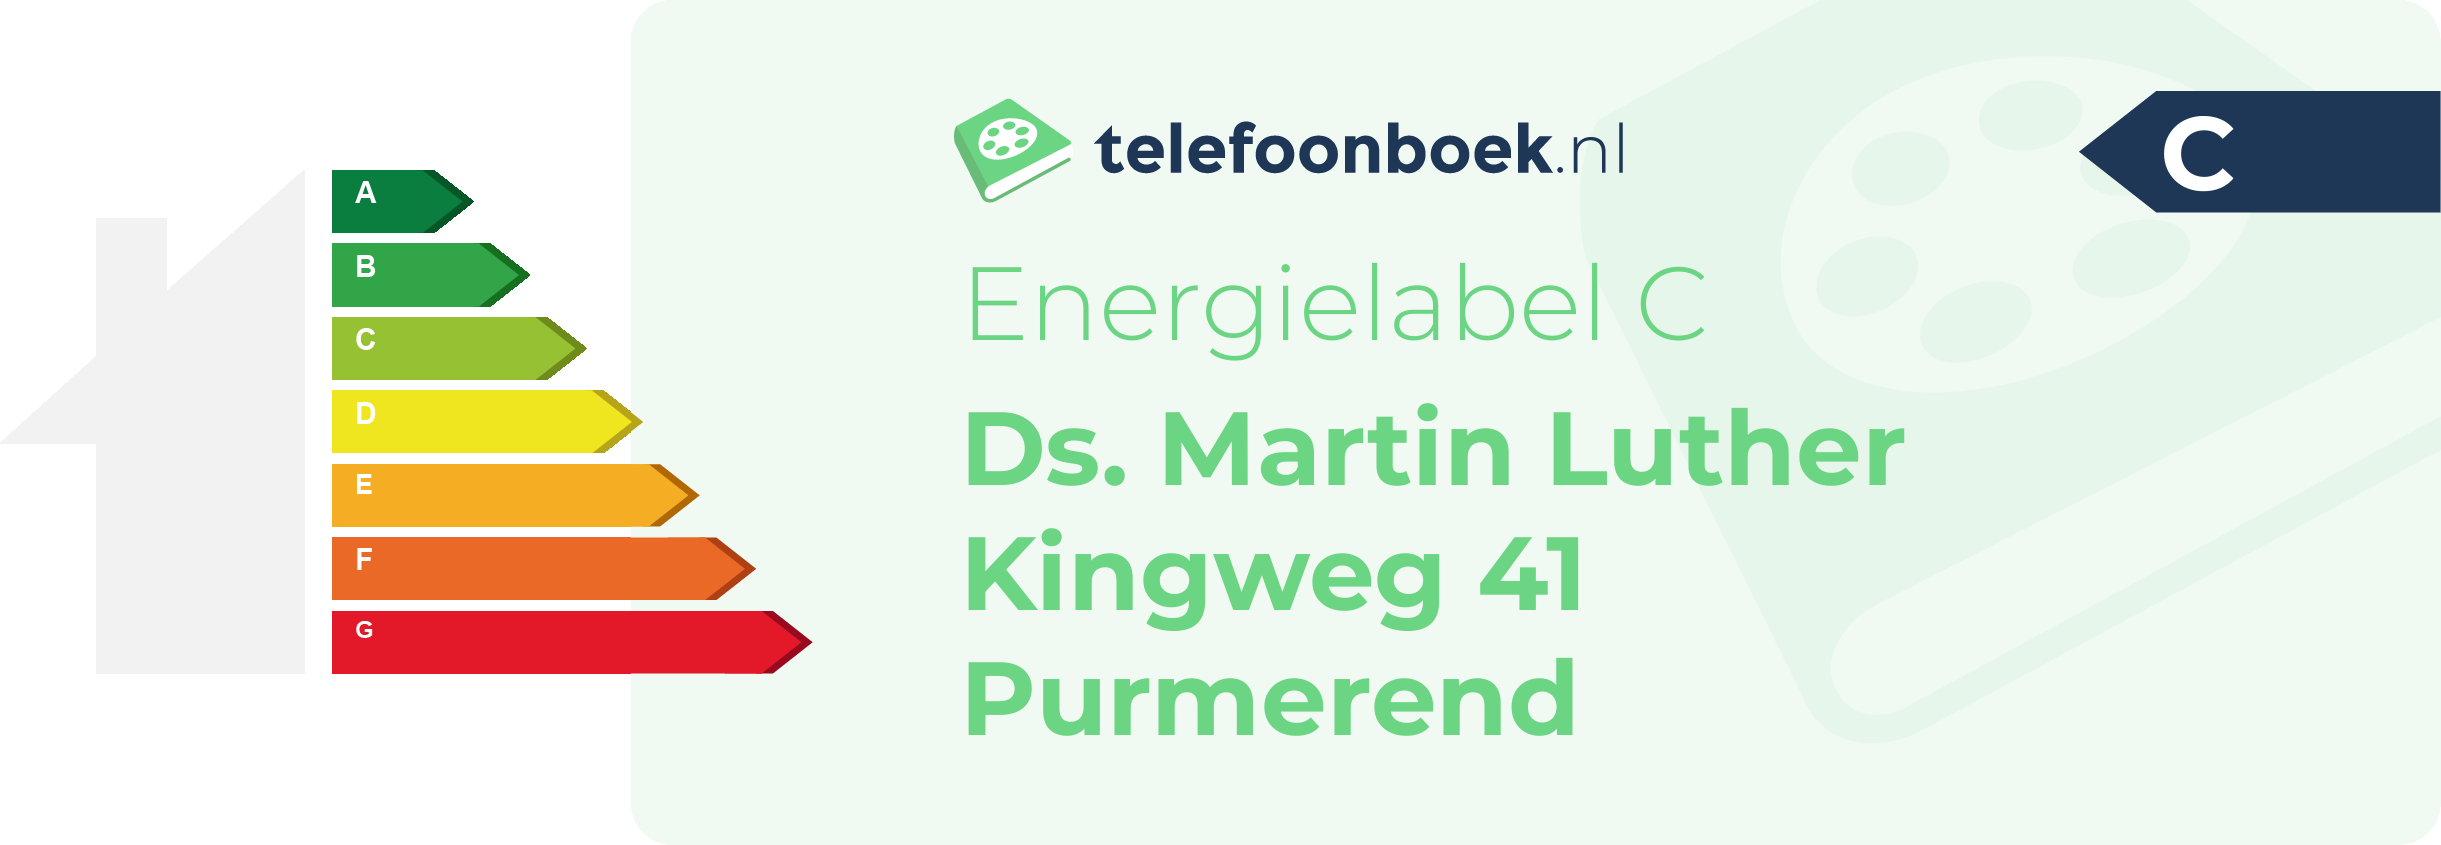 Energielabel Ds. Martin Luther Kingweg 41 Purmerend